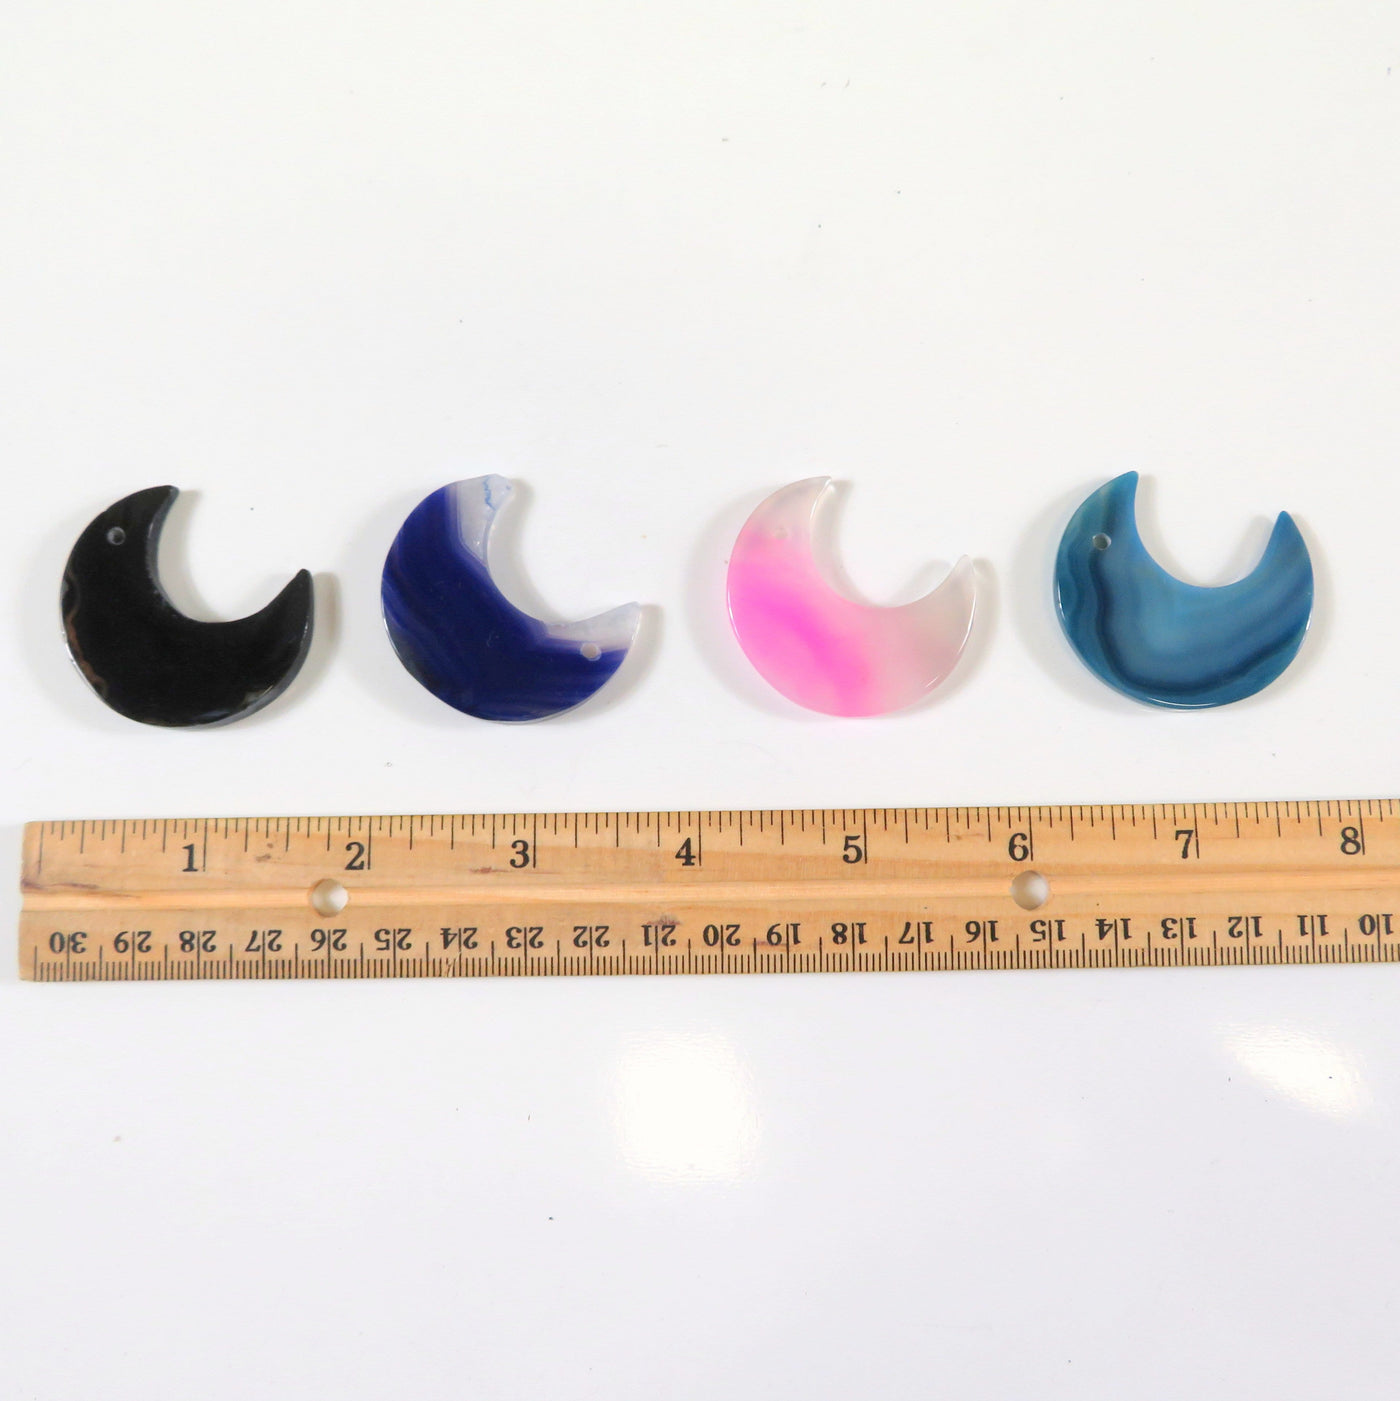 4 Different Color Drilled Agate Moons Under them a Ruler Showing The Size on White Background.